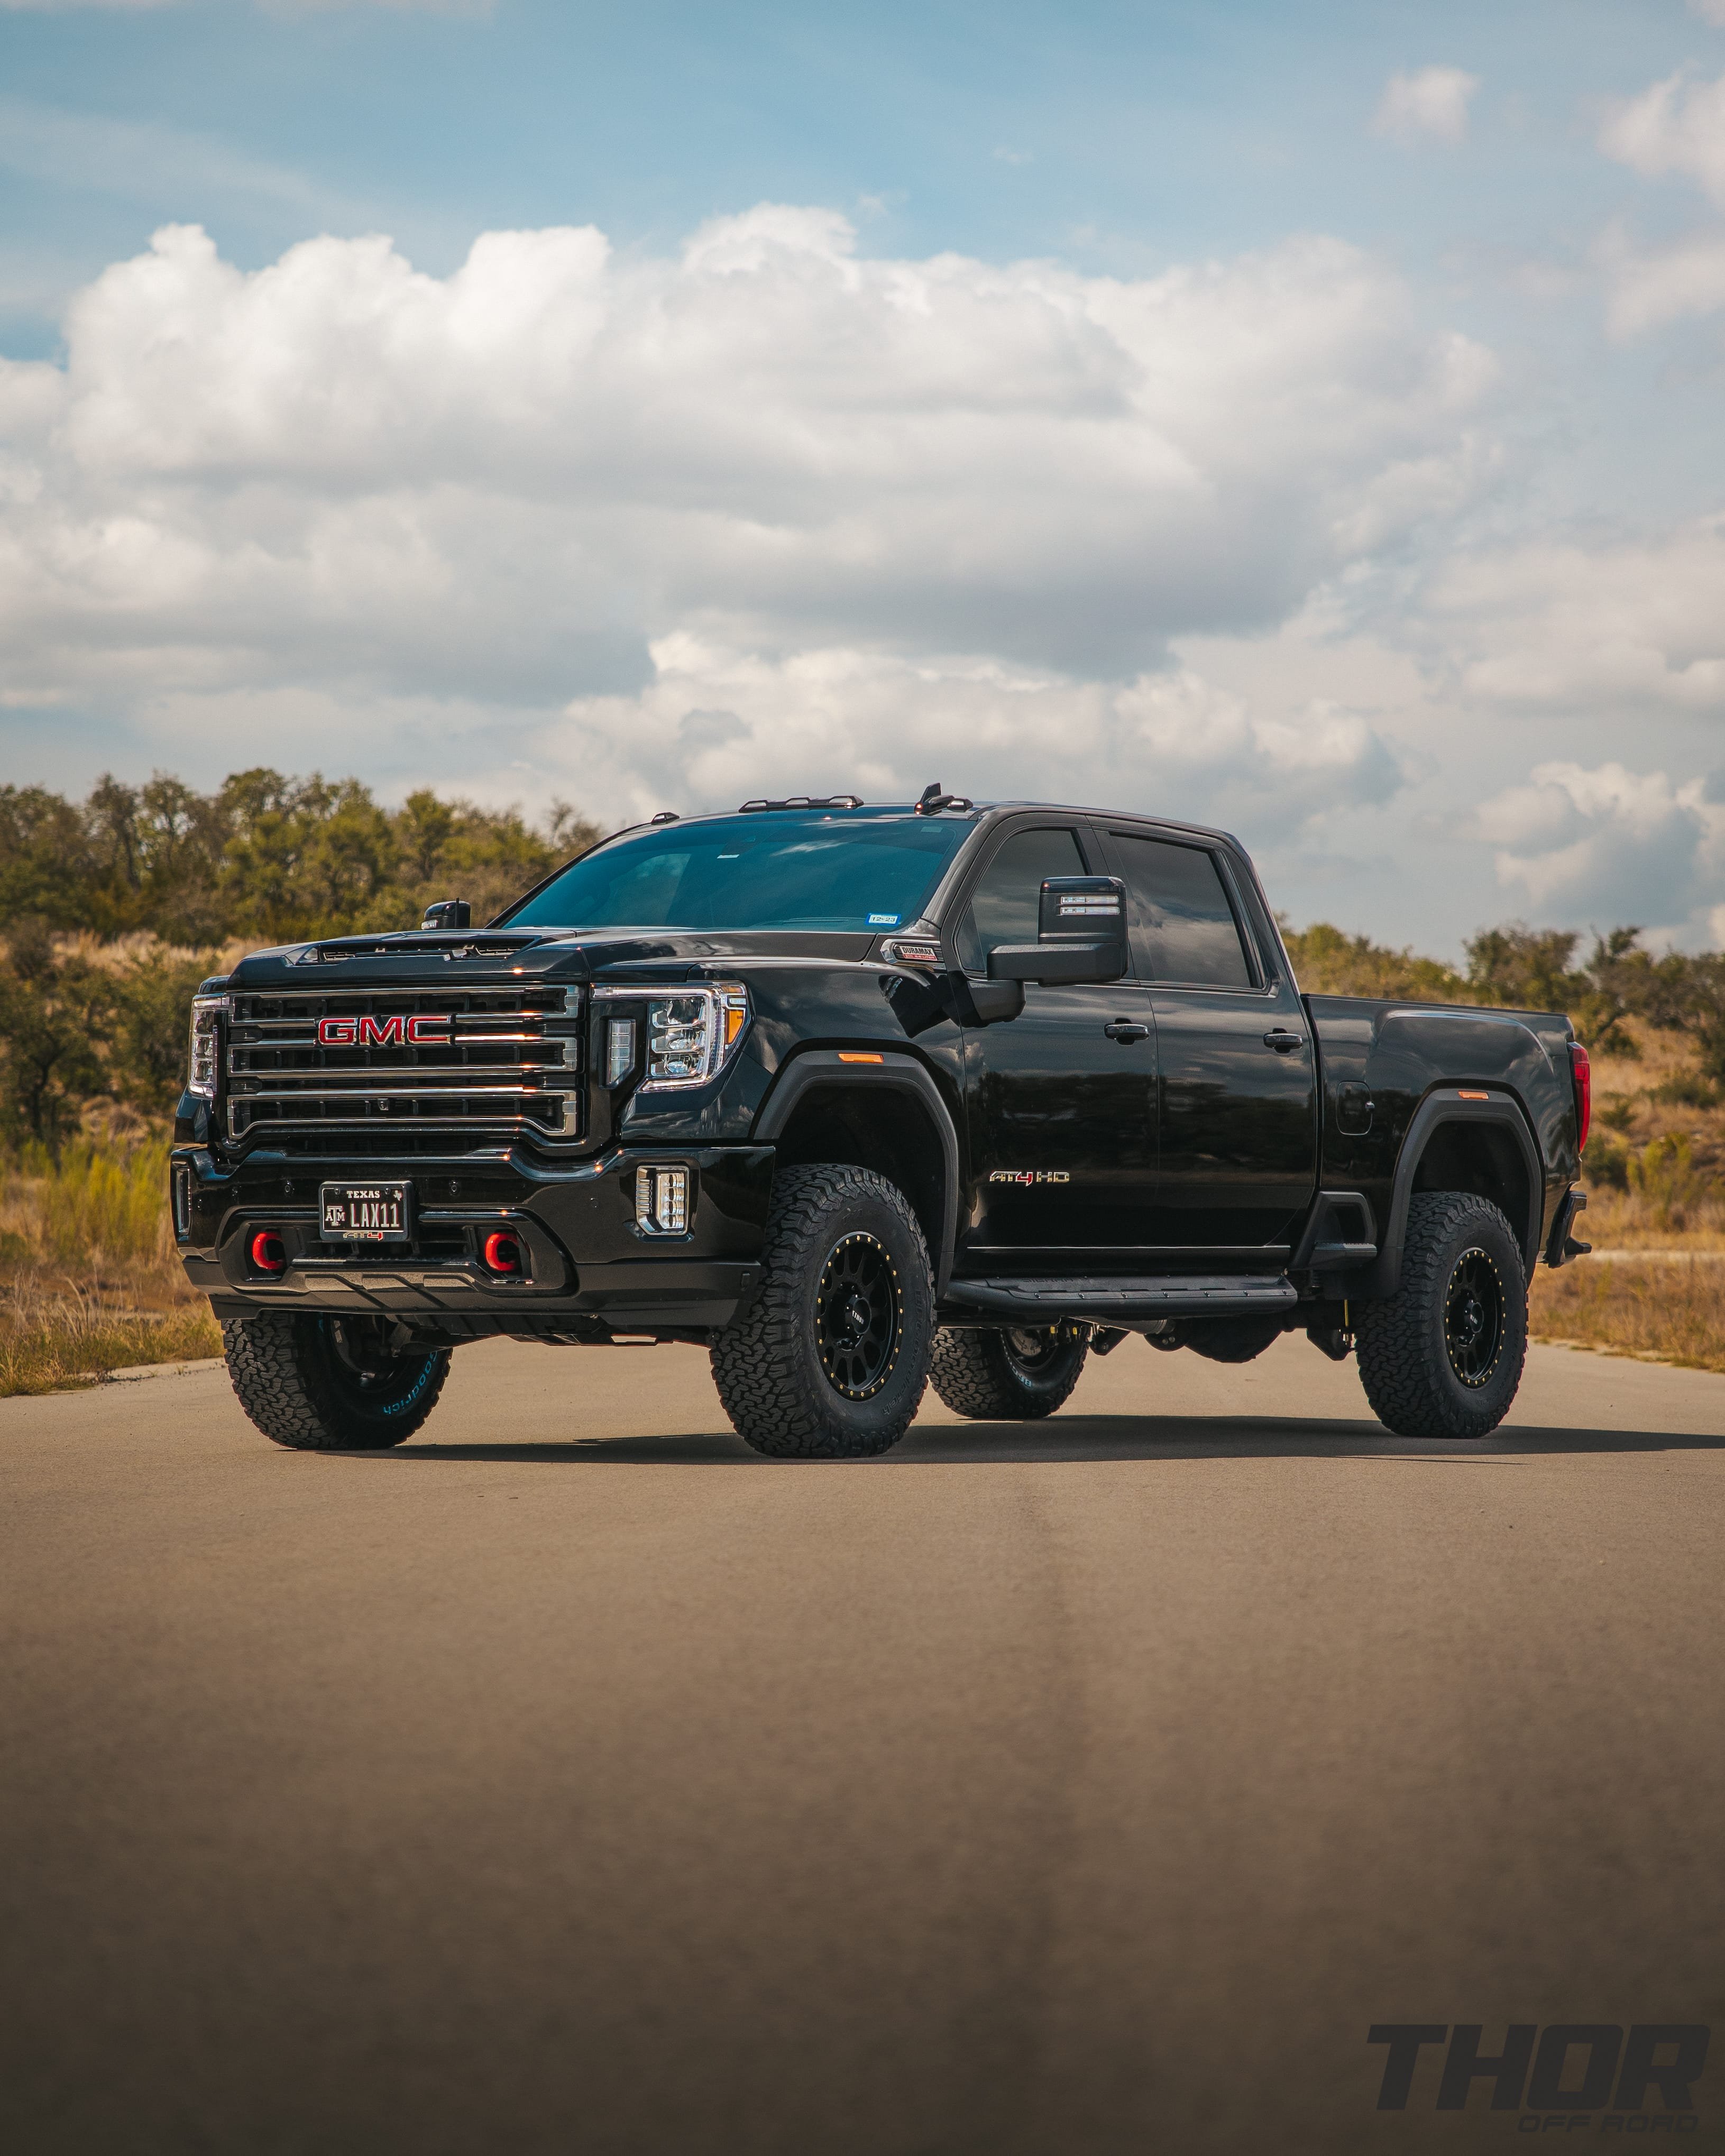 2022 GMC Sierra 2500 HD AT4 in Onyx Black with 3" Cognito Performance Suspension Kit, 18" Method 305 NV Wheels, 35x12.50R18 BFG KO2 Tires, ReadyLift Air Bag Kit